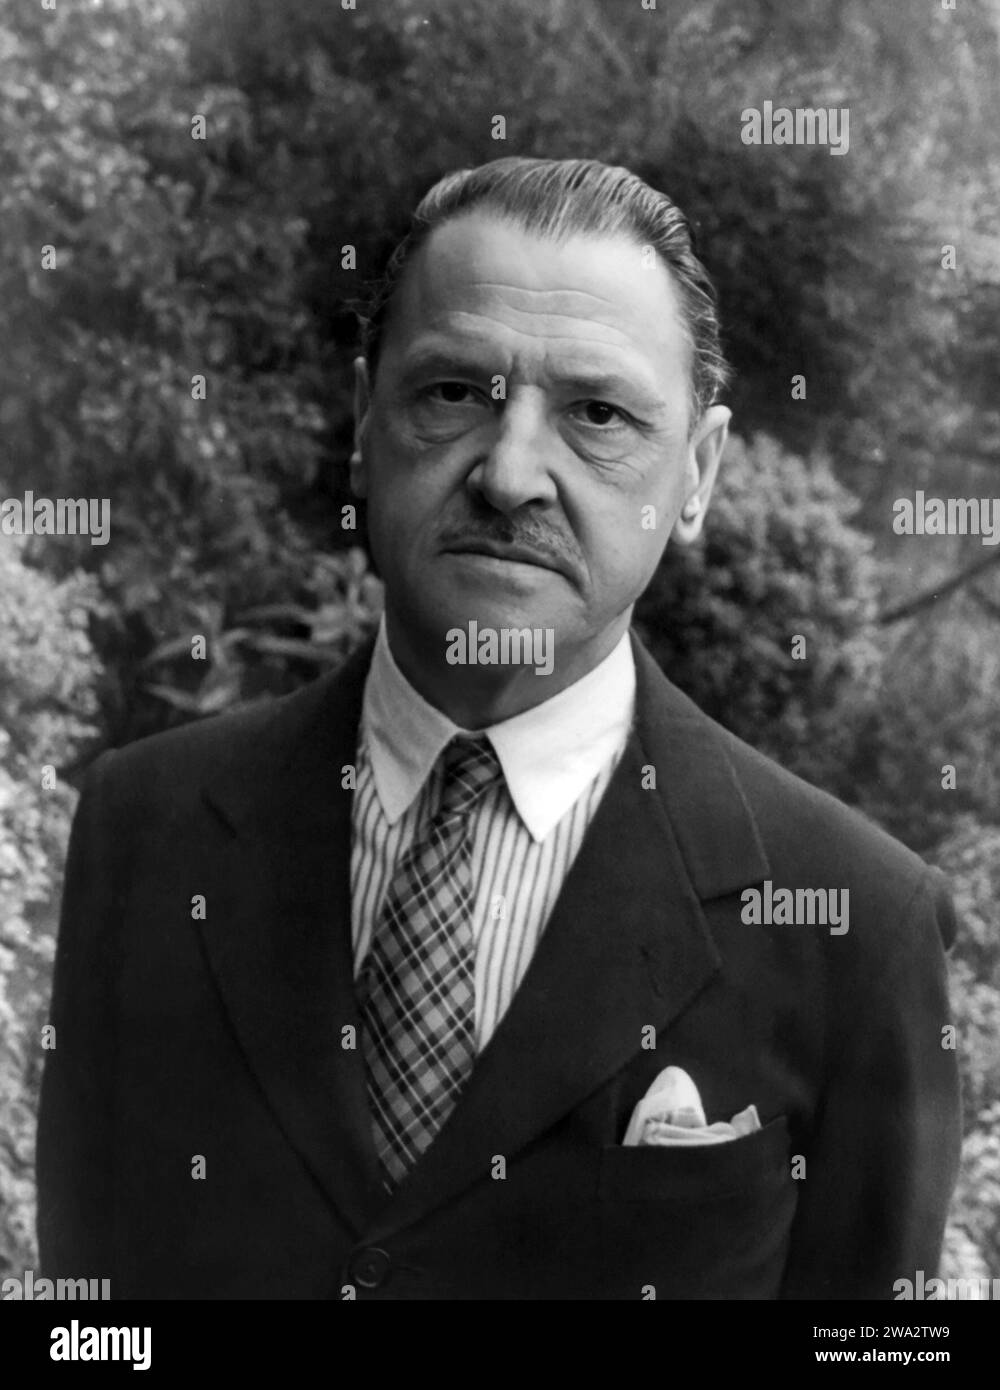 Somerset Maugham. Portrait of the English writer, William Somerset Maugham (1874-1965) by Carl van Vechten, 1934 Stock Photo